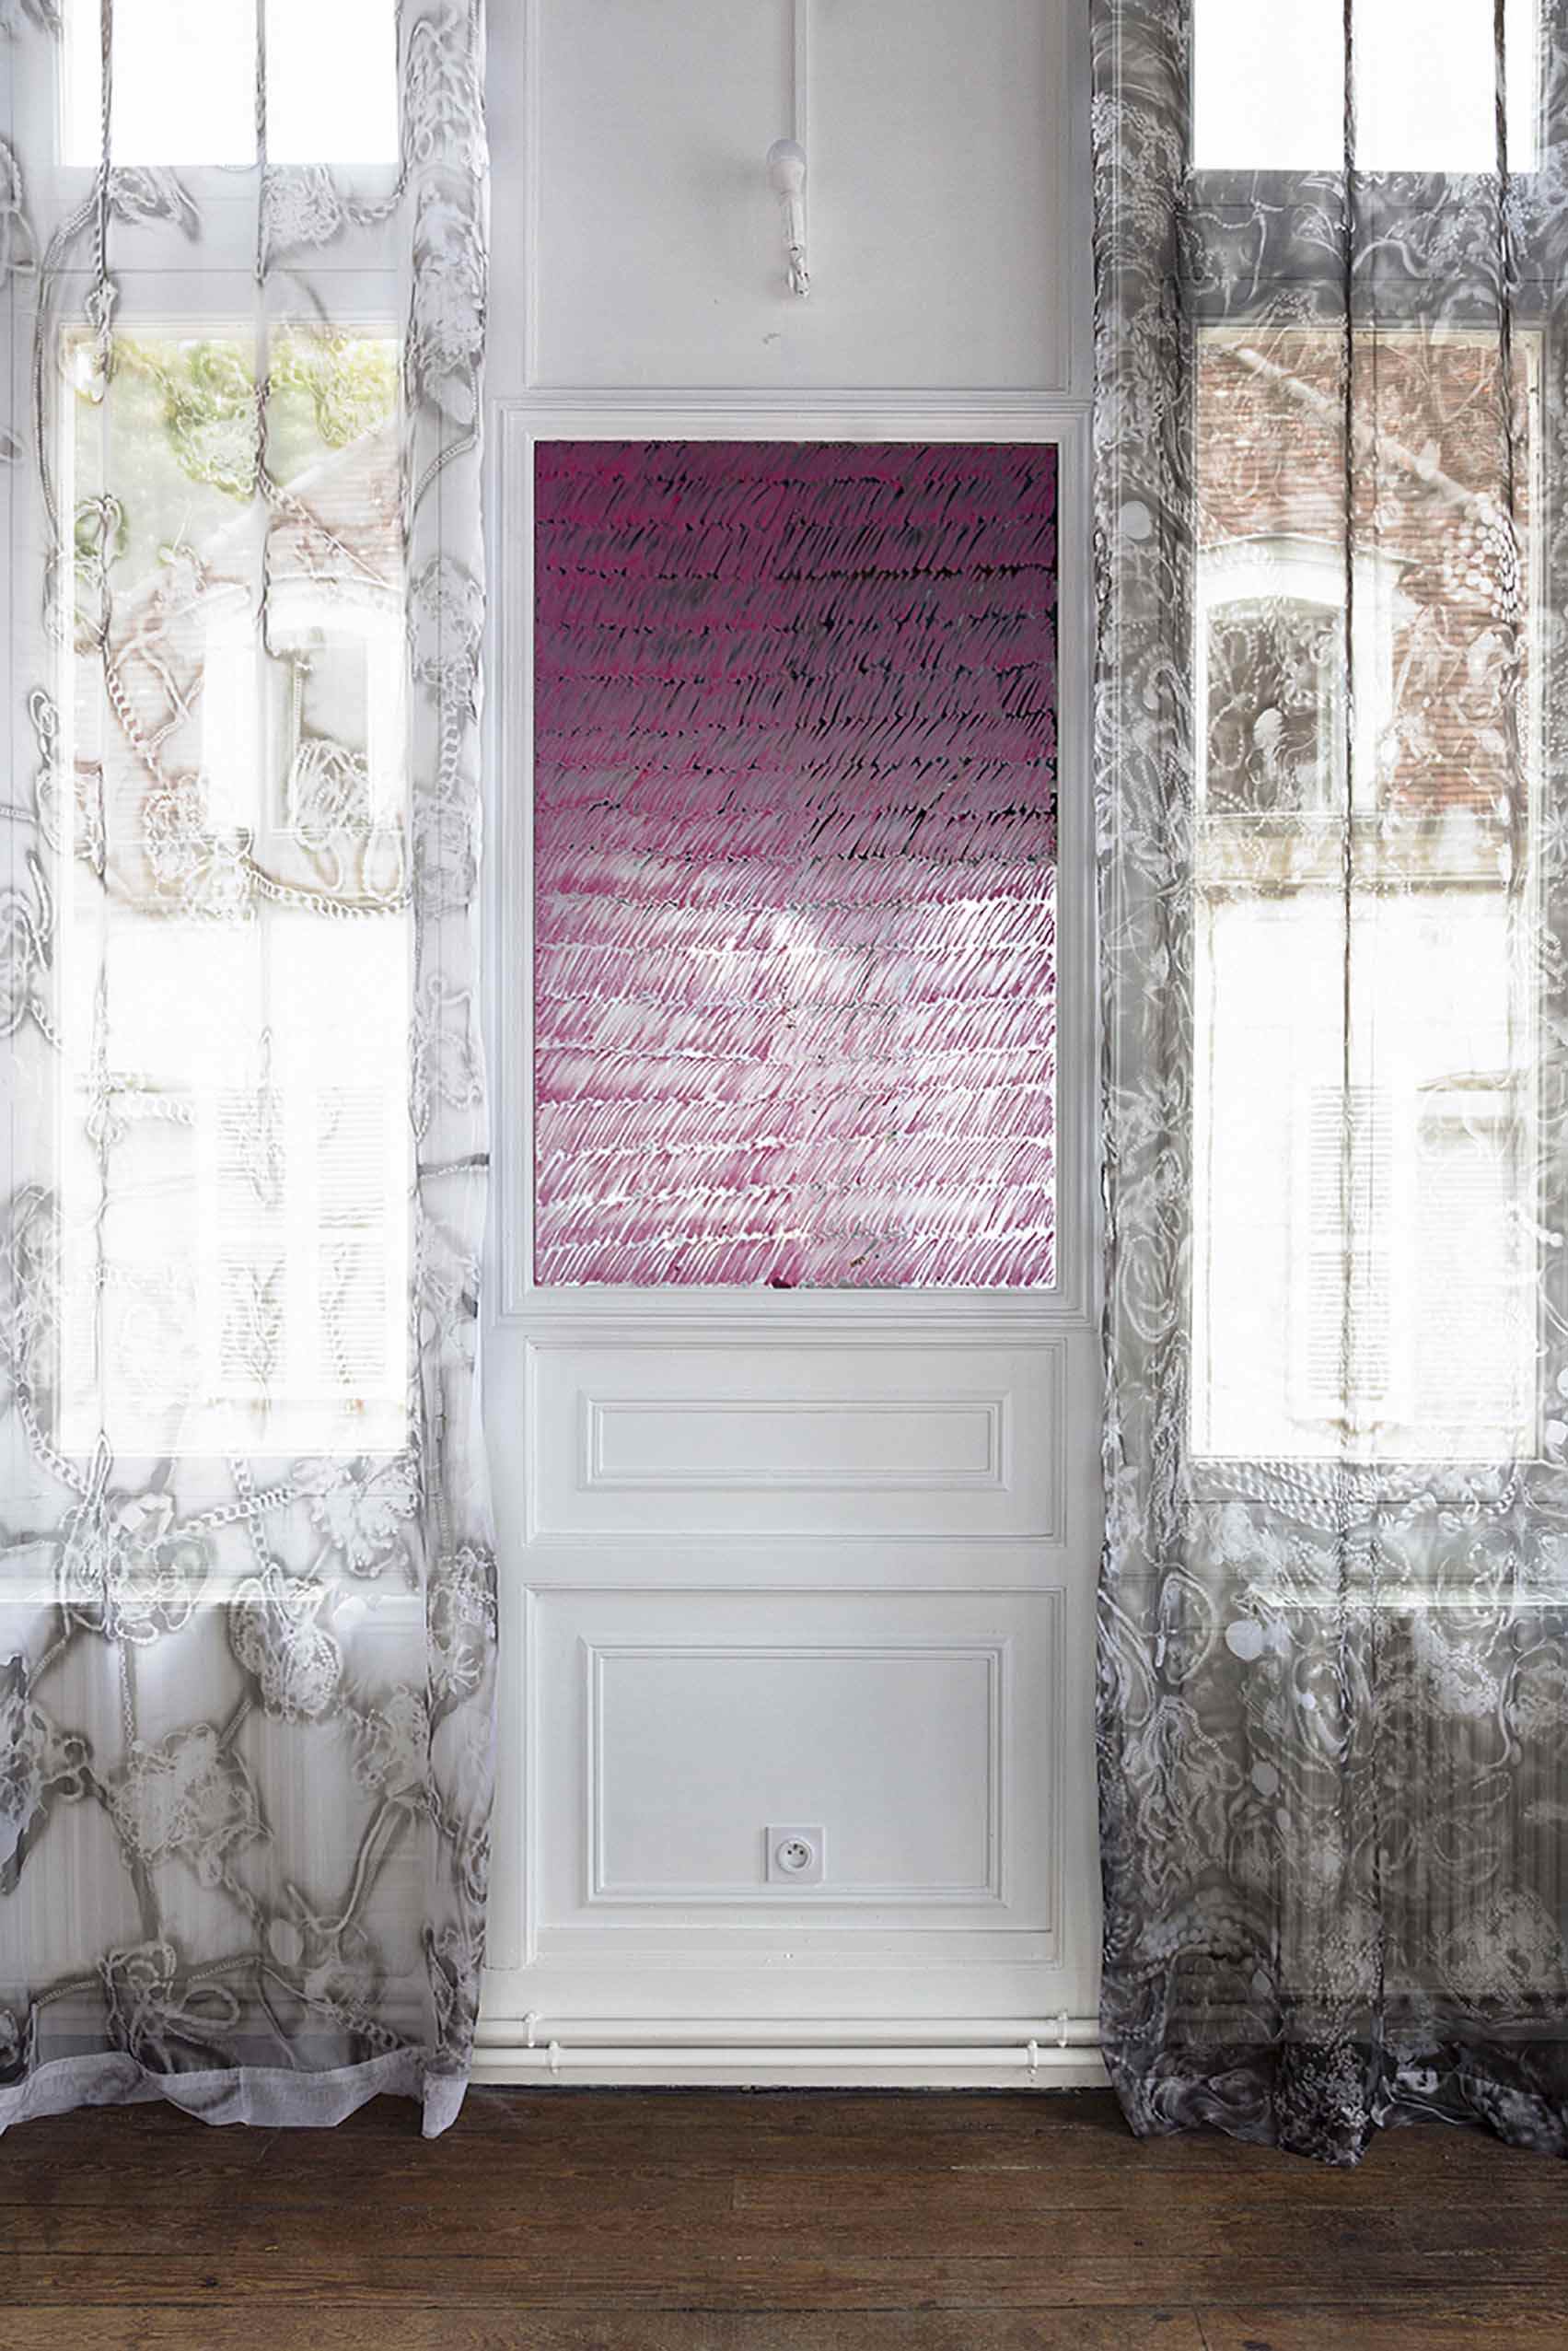 Whispered Sentences Banished from Memories, 2022, lipstick on mirror, 130 x 80 cm